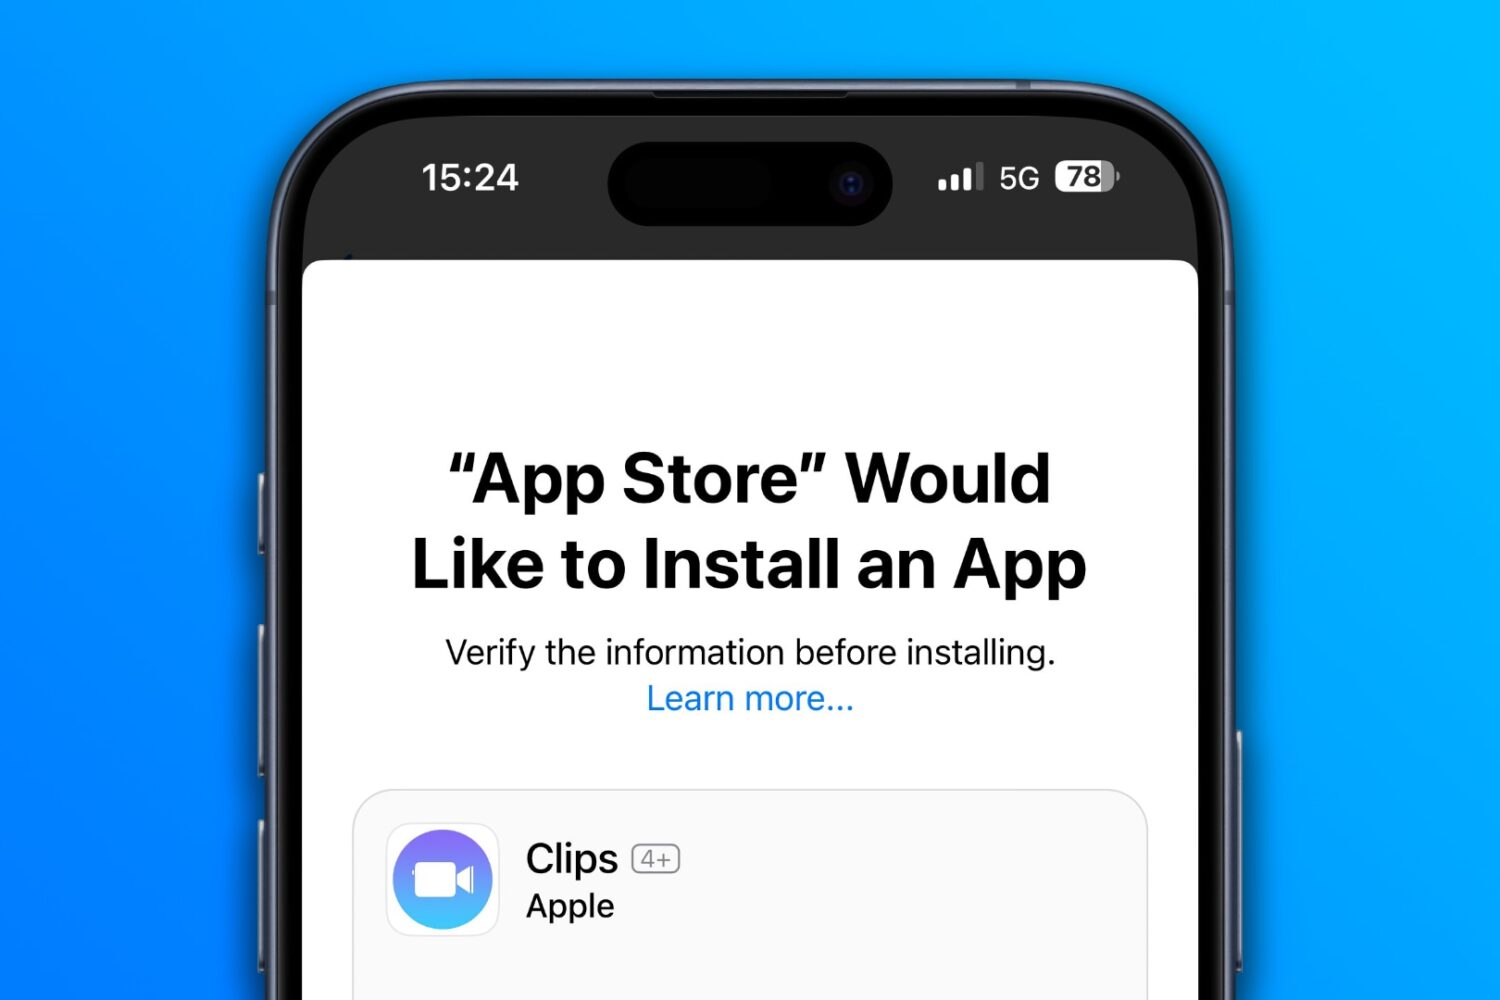 Download permission prompt in App Store on iPhone